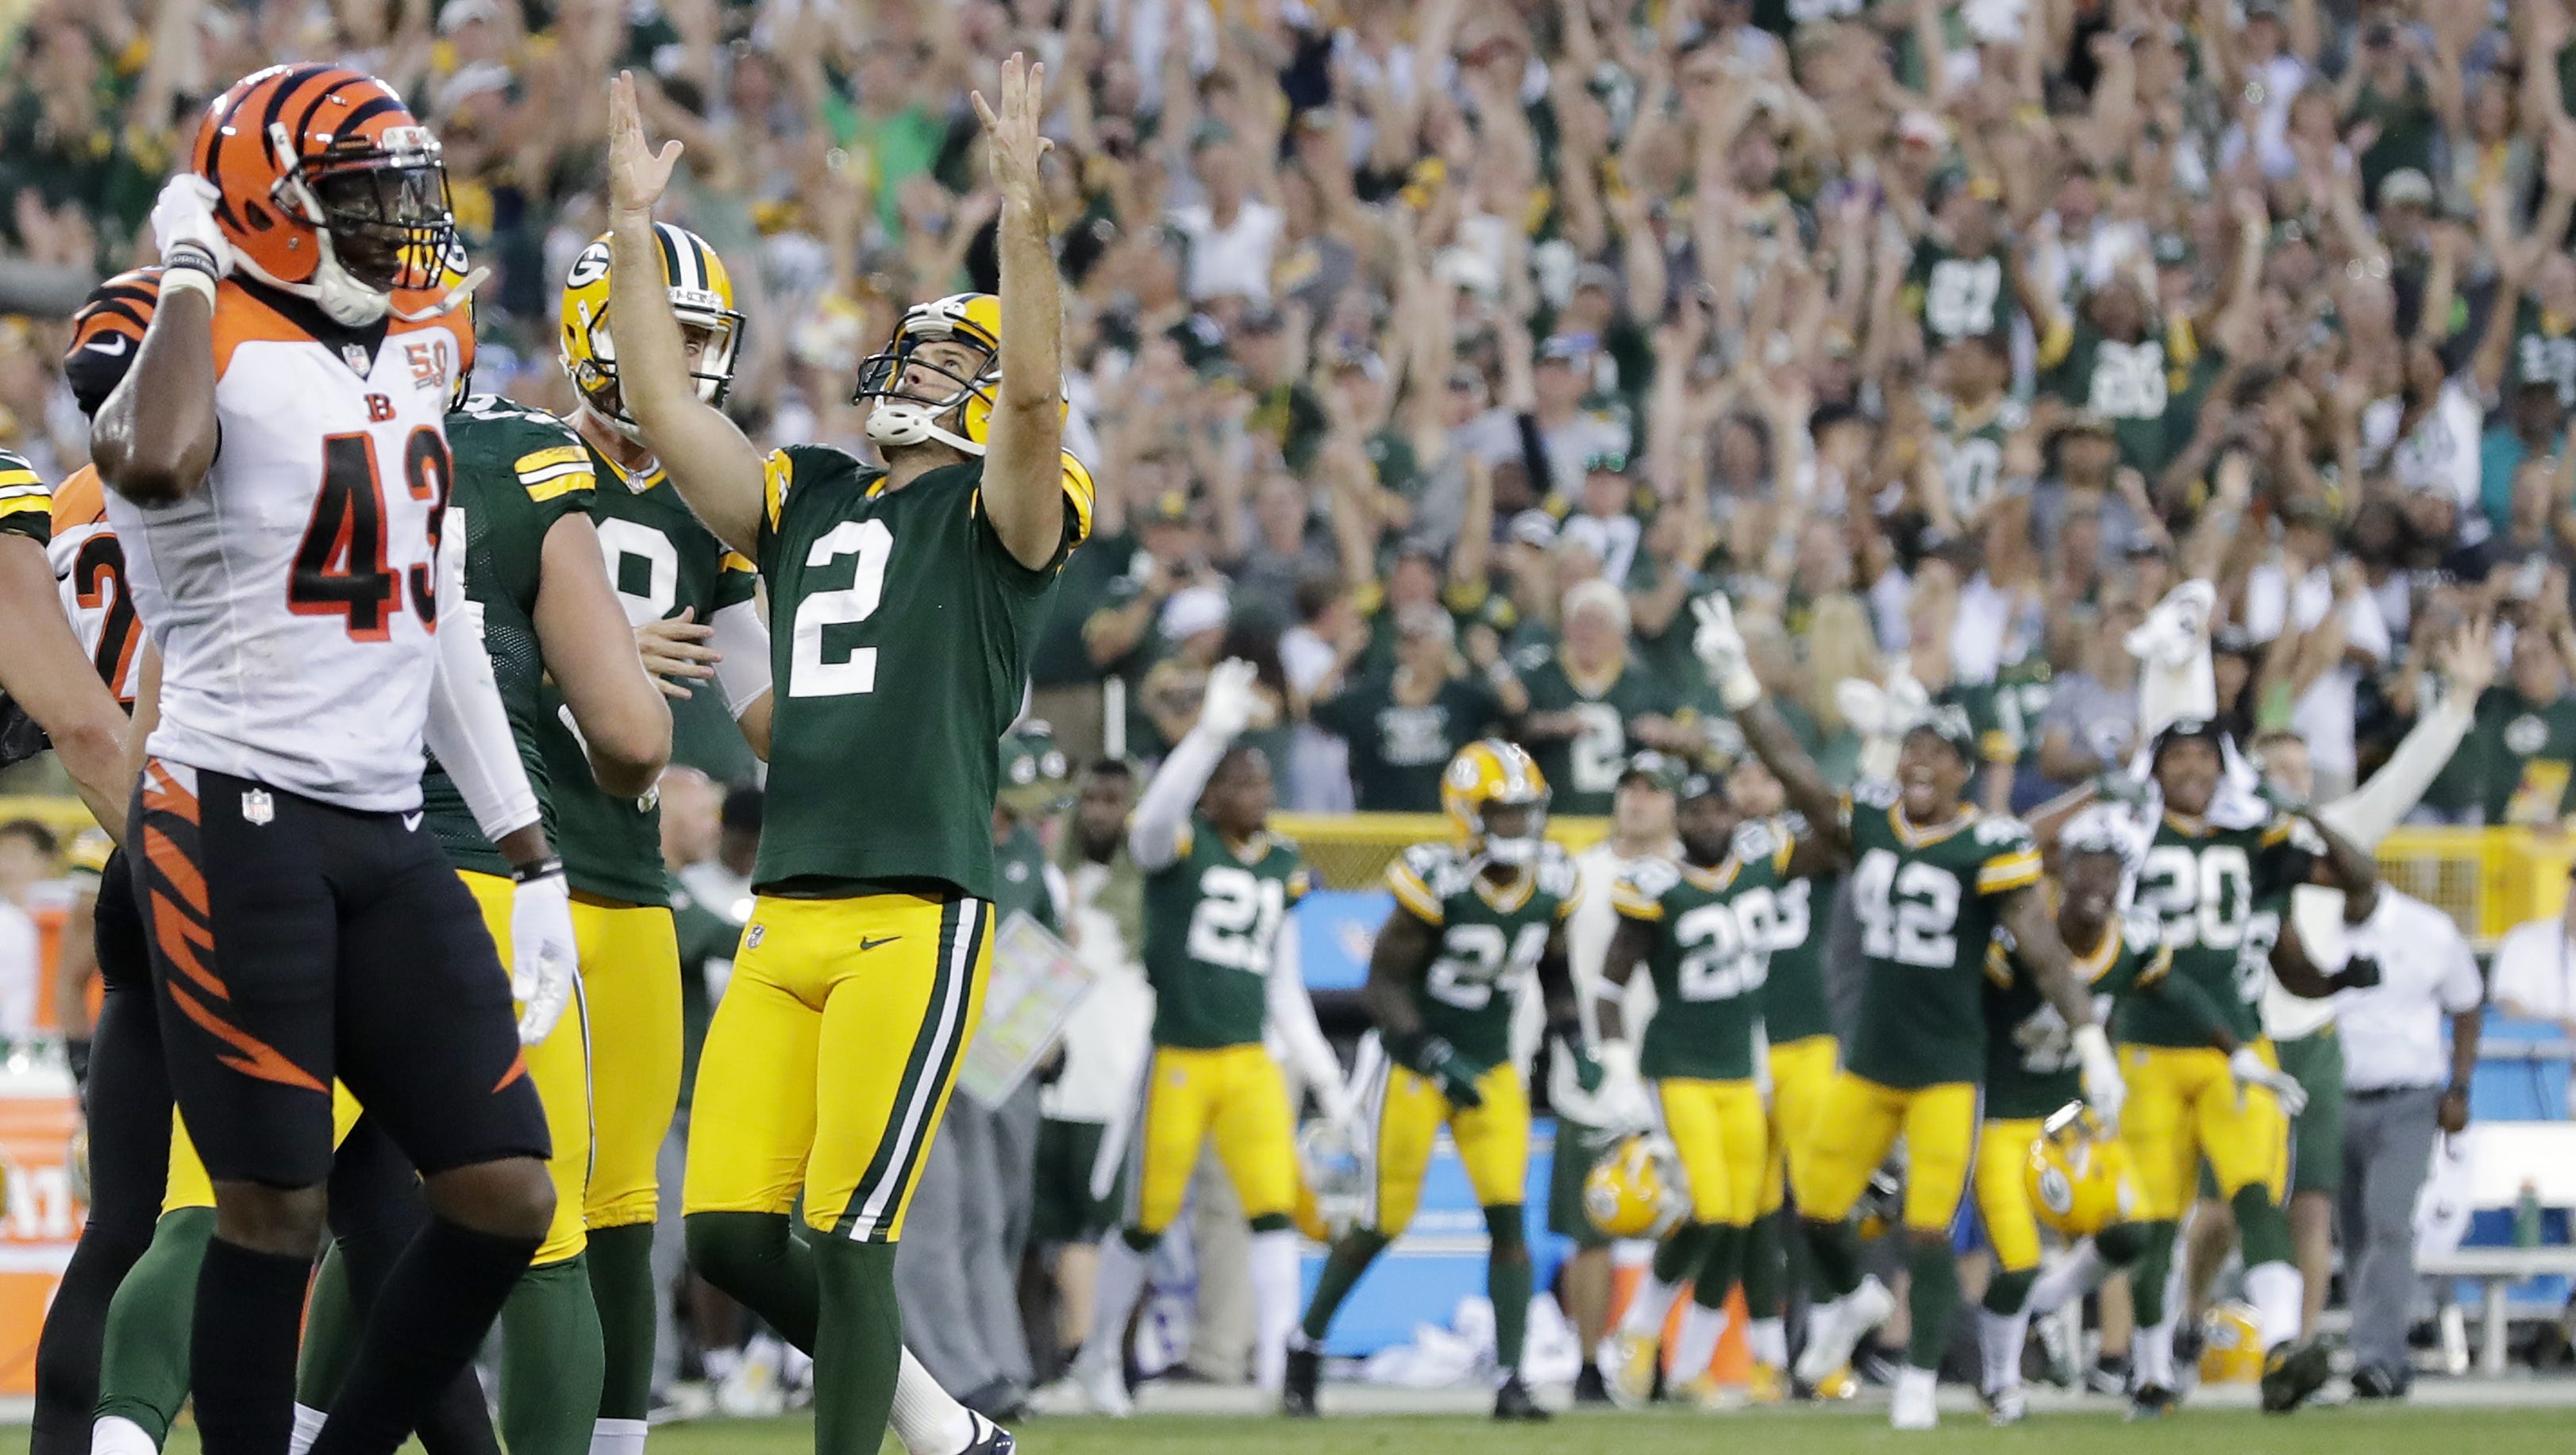 Green Bay Packers kicker Mason Crosby (2) celebrates after kicking the game-winning field goal against the Cincinnati Bengals in overtime on Sept. 24, 2017, at Lambeau Field.